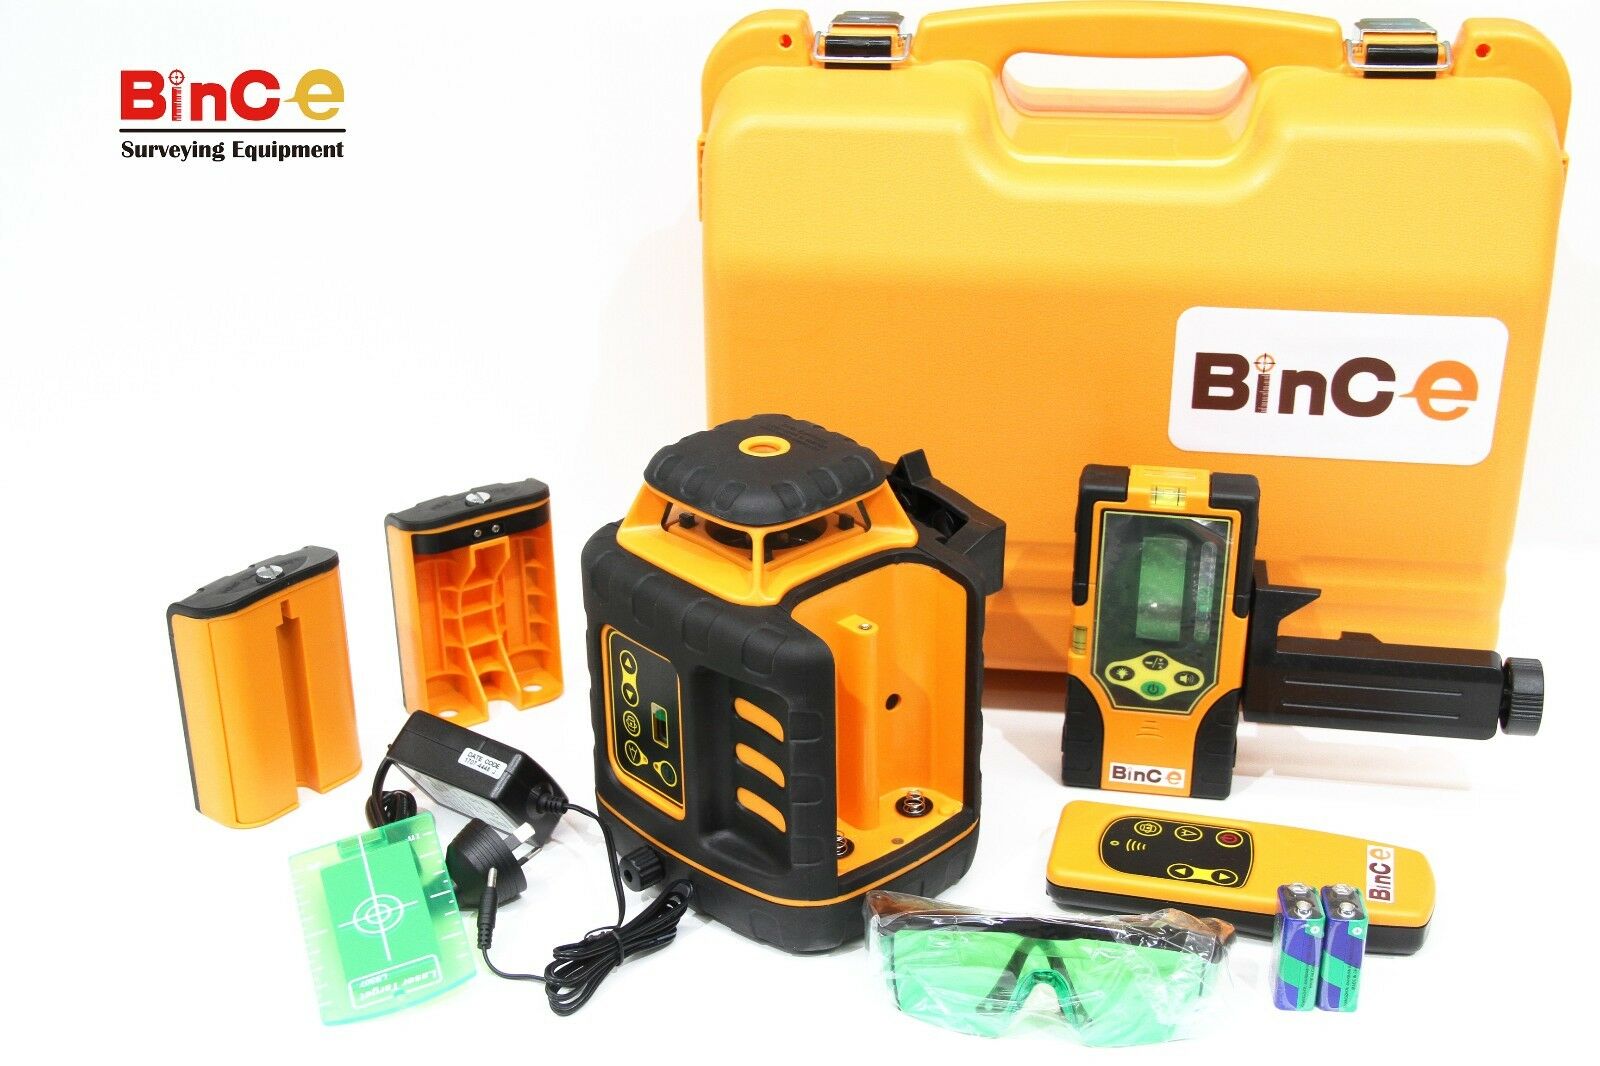 Green Beam Rotary Laser Level Self Leveling Rotating & Receiver & Remote Control